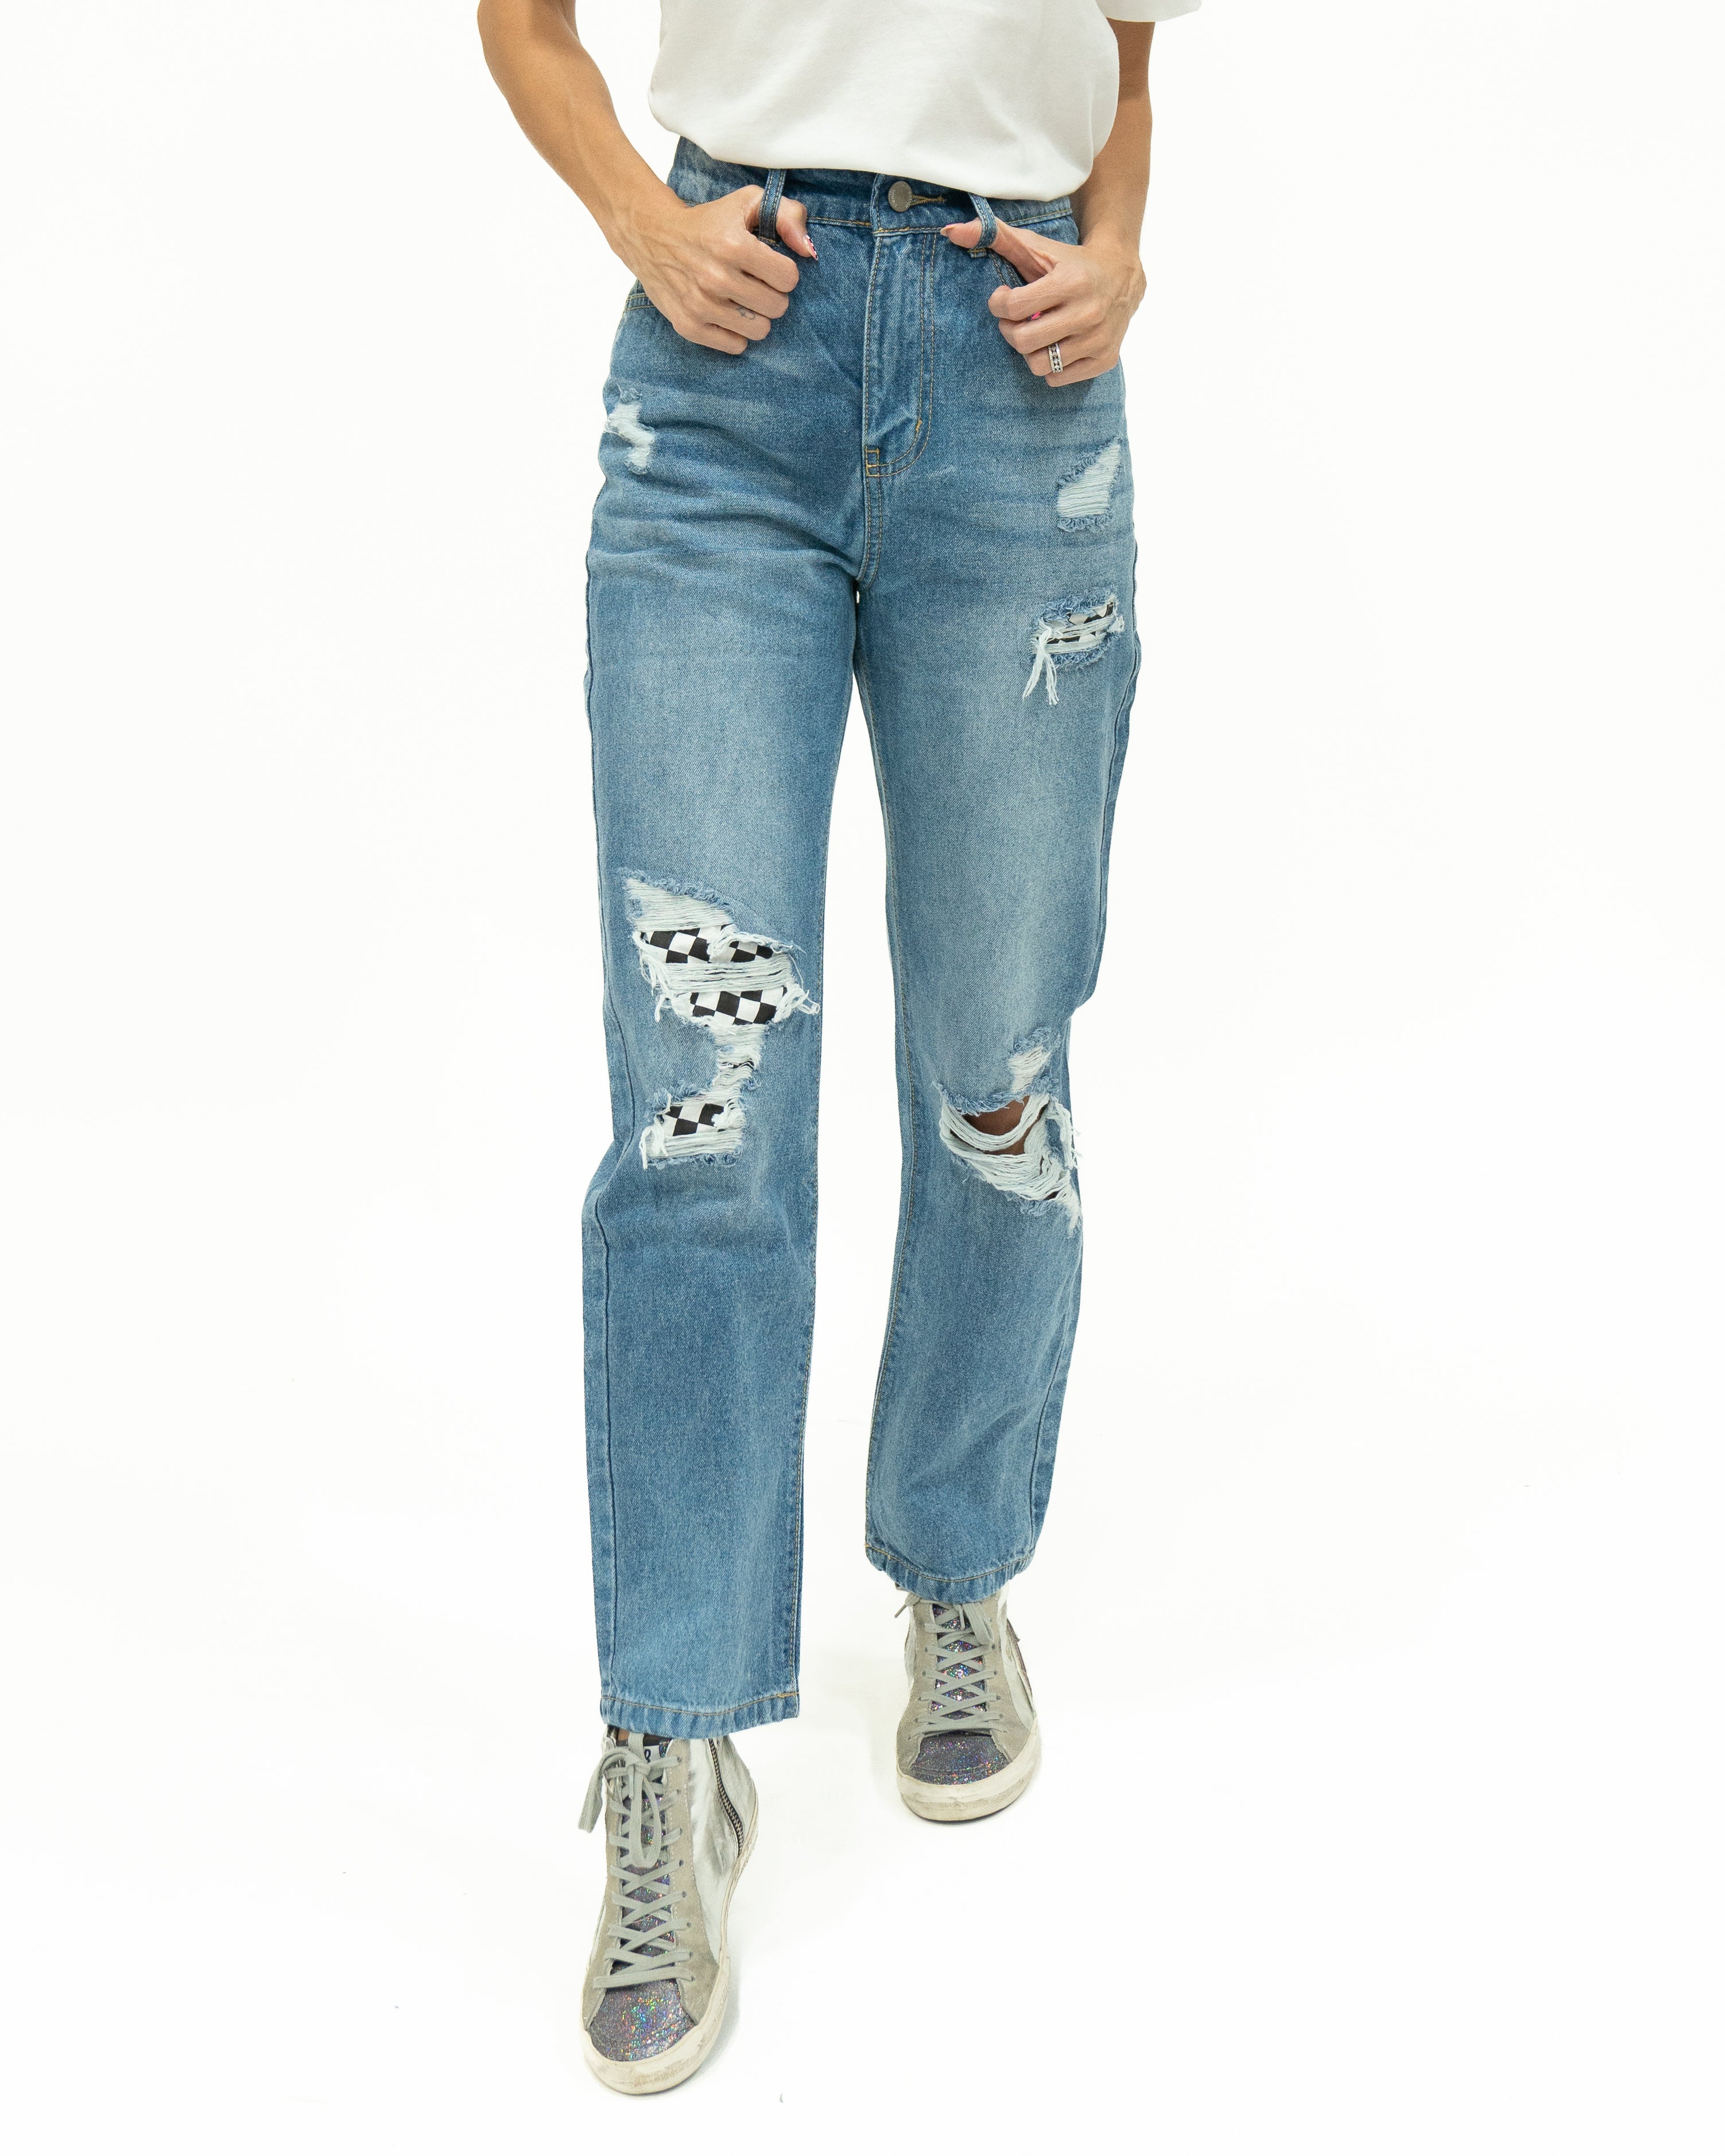 Women's Traditional 100% Cotton Custom Tailored Jeans | Black River Apparel